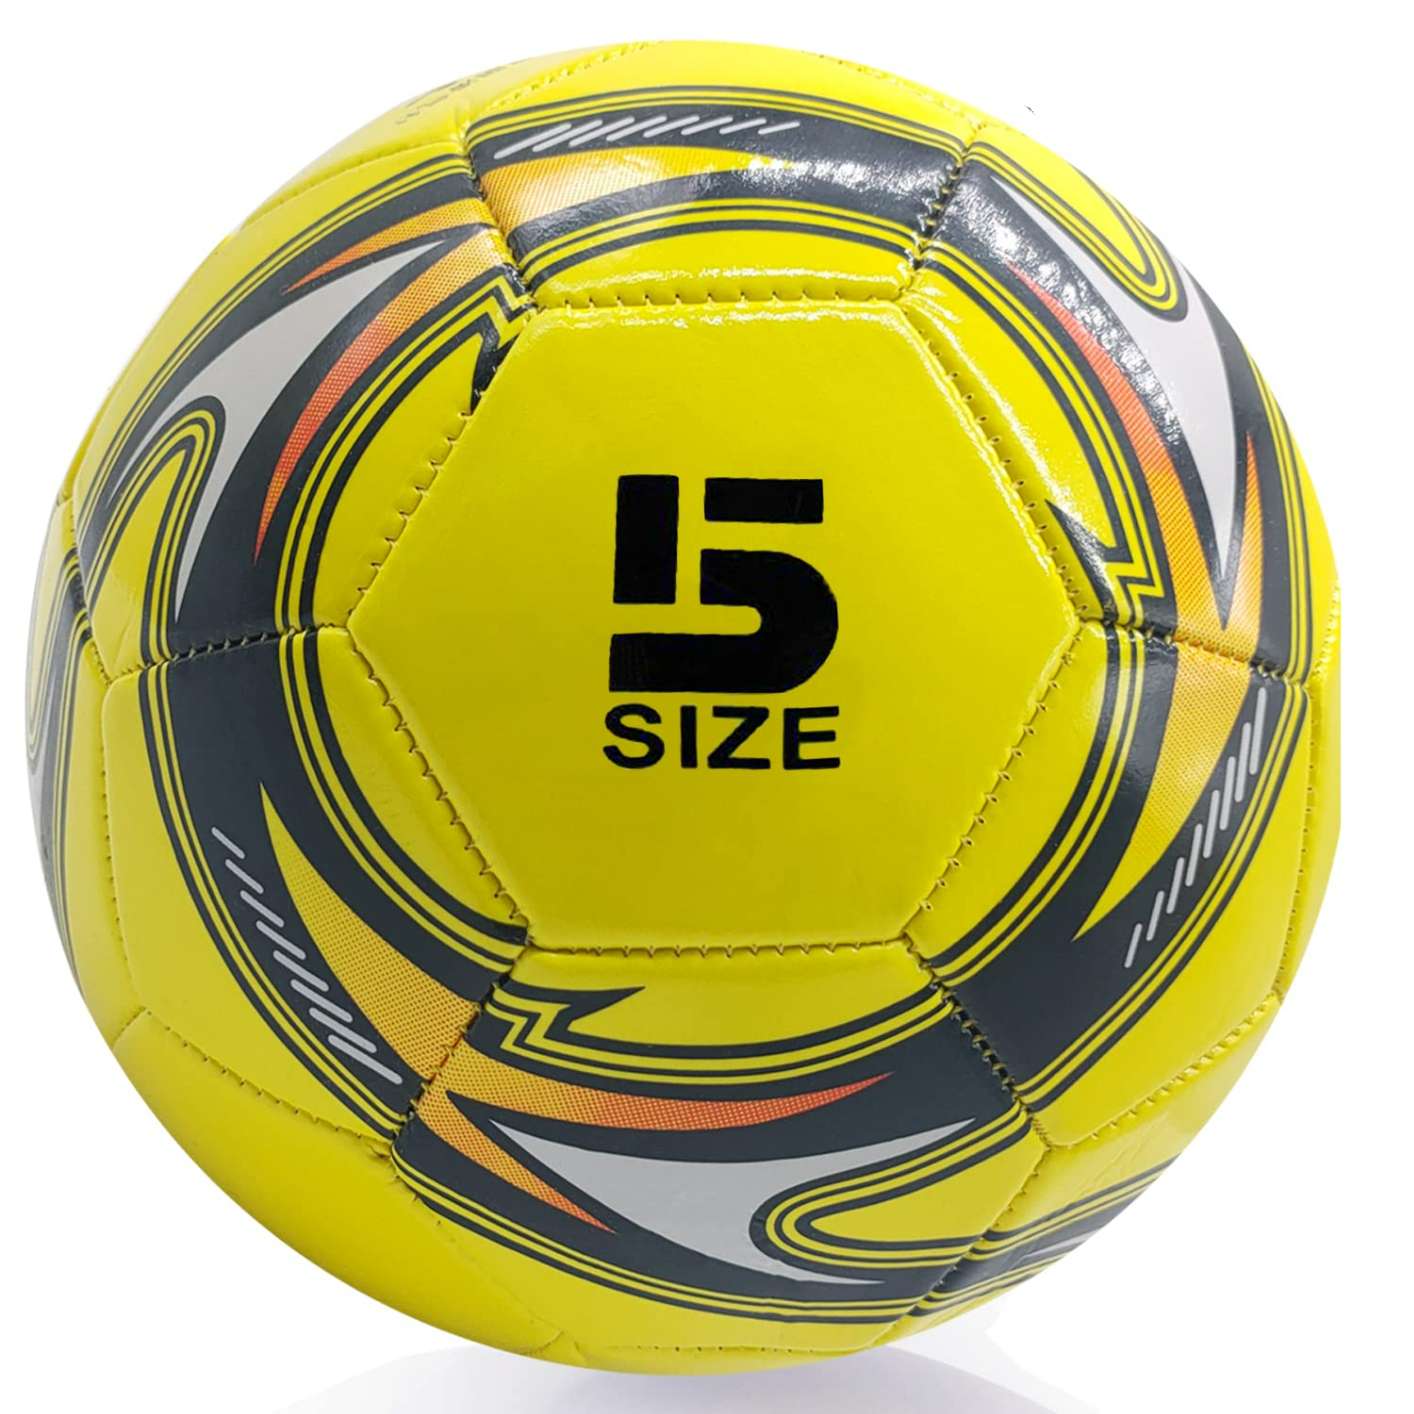 MECOLA Football Size 5andSize 4 Training Football IndoorandOutdoor Match Ball TospinoMall online shopping platform in GhanaTospinoMall Ghana online shopping